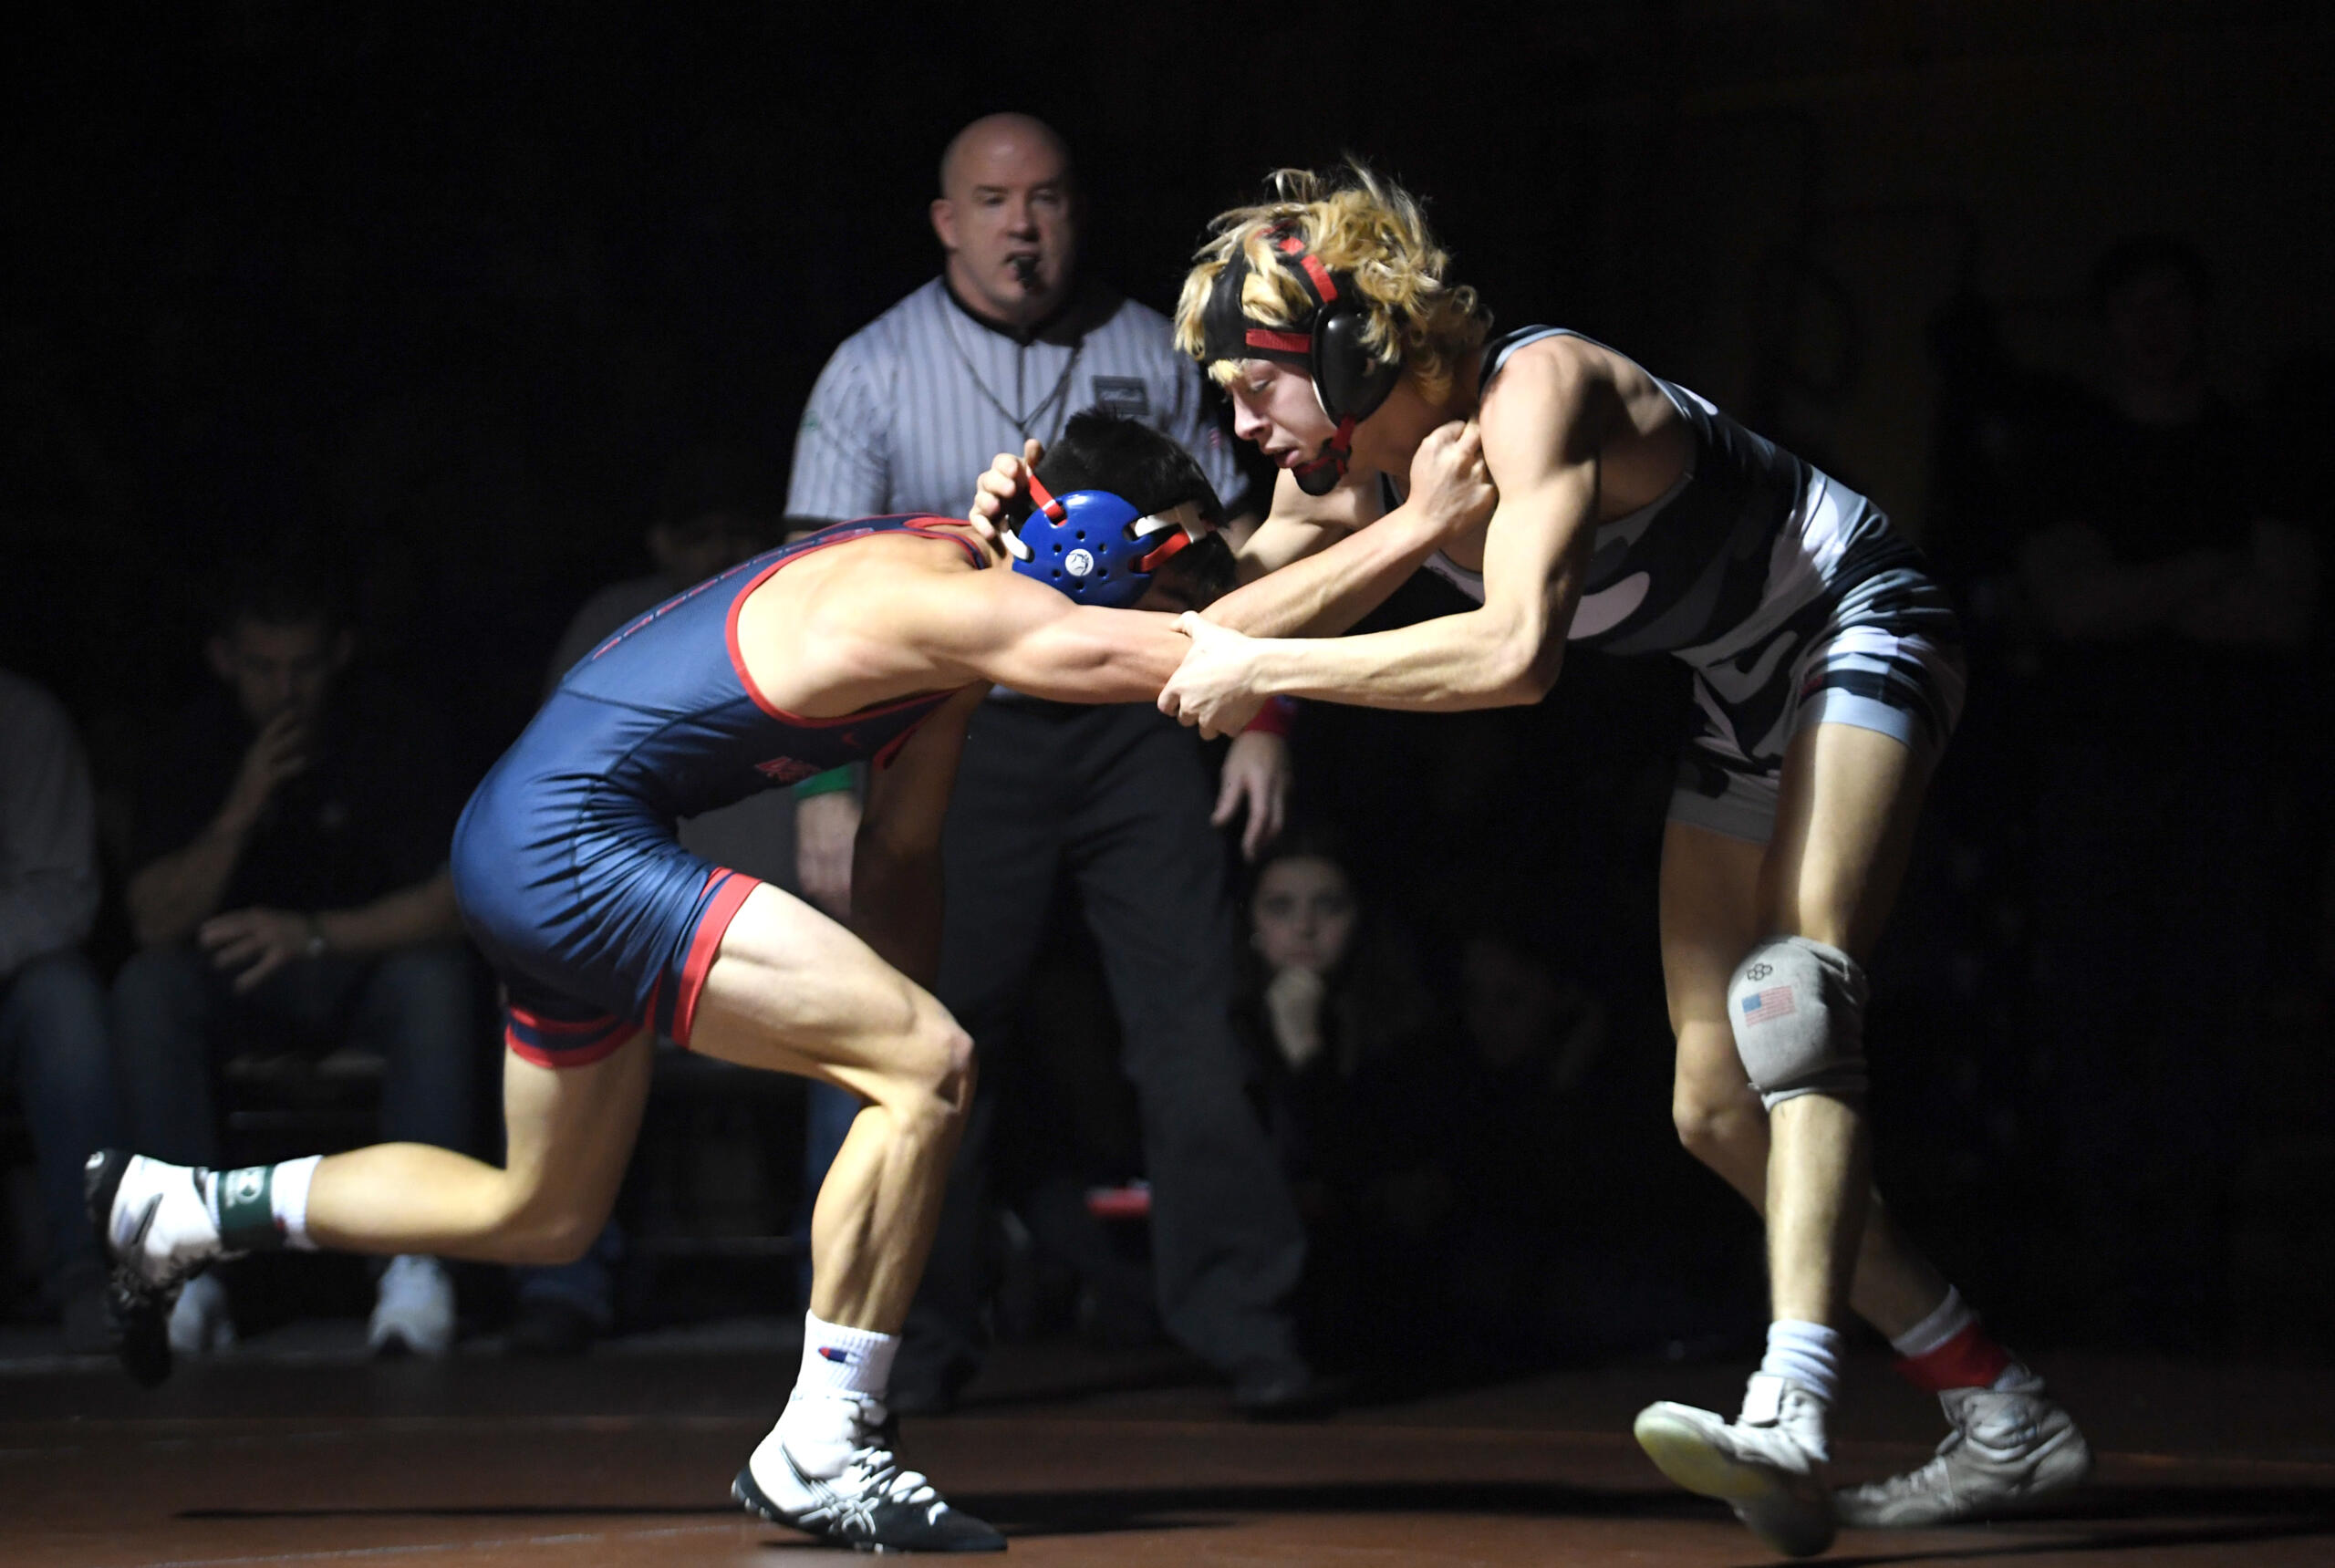 Pacific Coast Wrestling Championships photo gallery